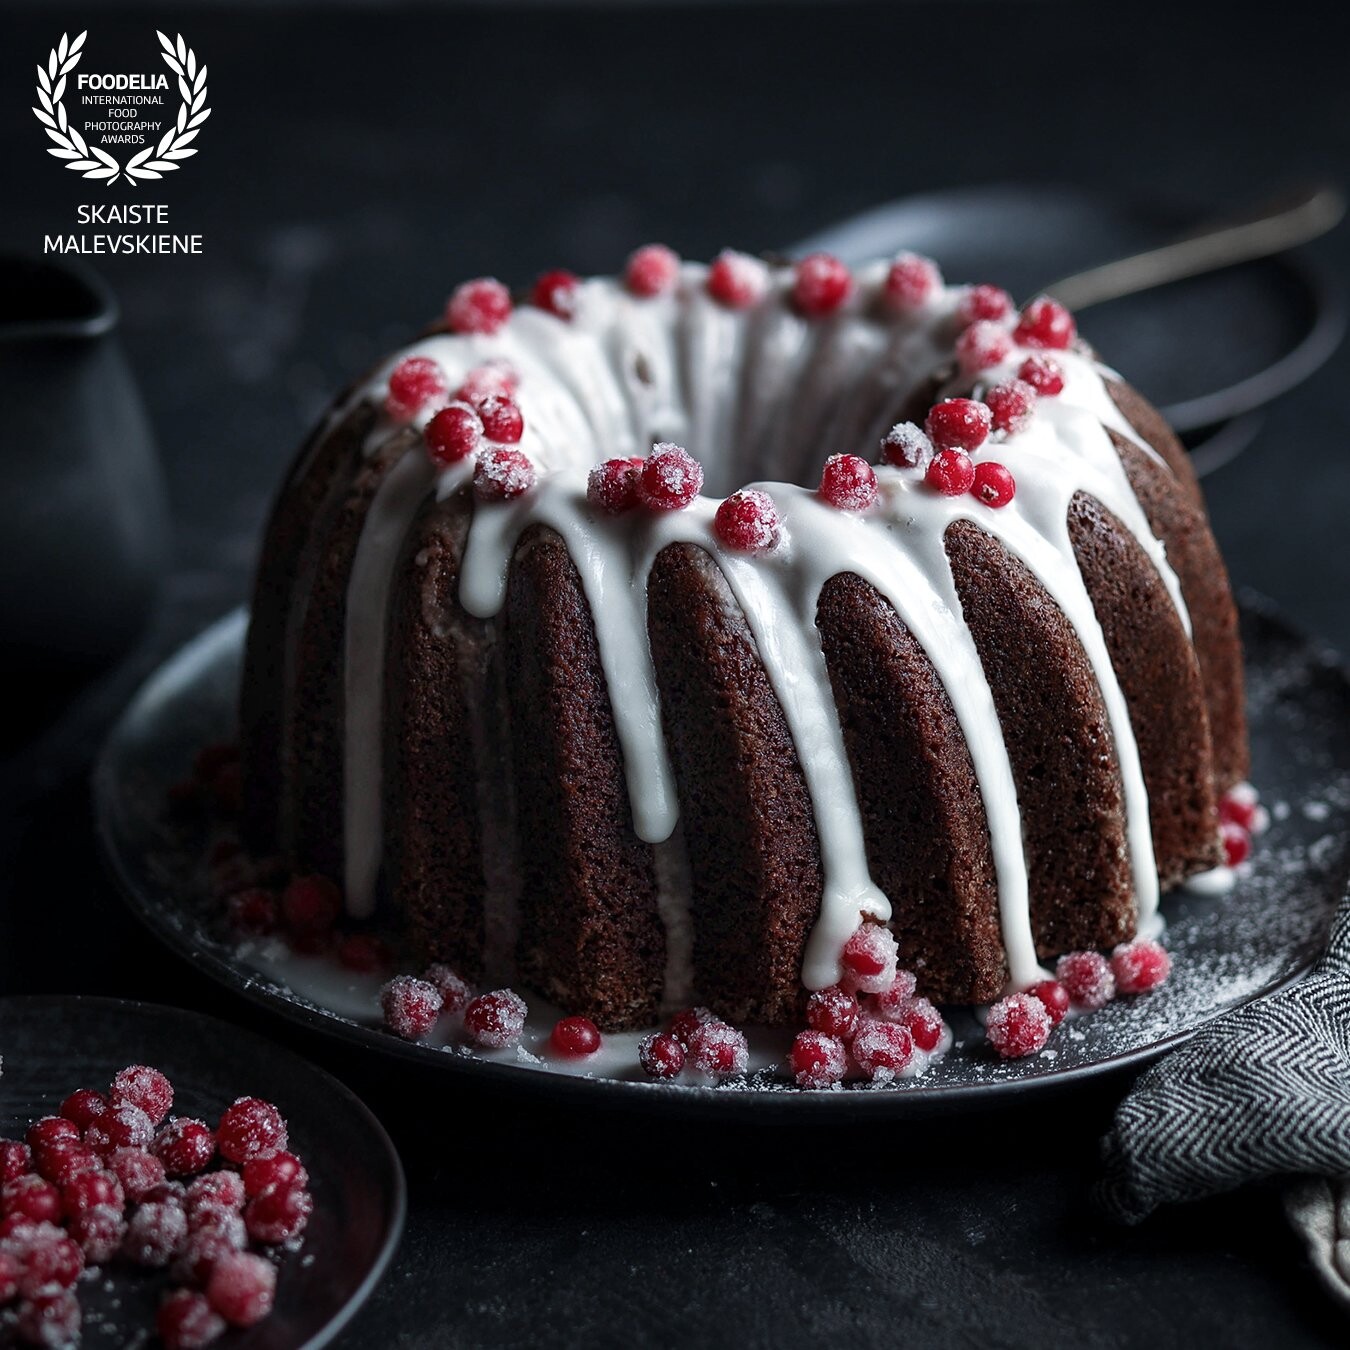 Gingerbread bundt cake with candied lingonberries crown. I am a huge fan of gingerbread dough or gingerbread anything and of course the process of baking just to fill your home with these beautiful  scents.